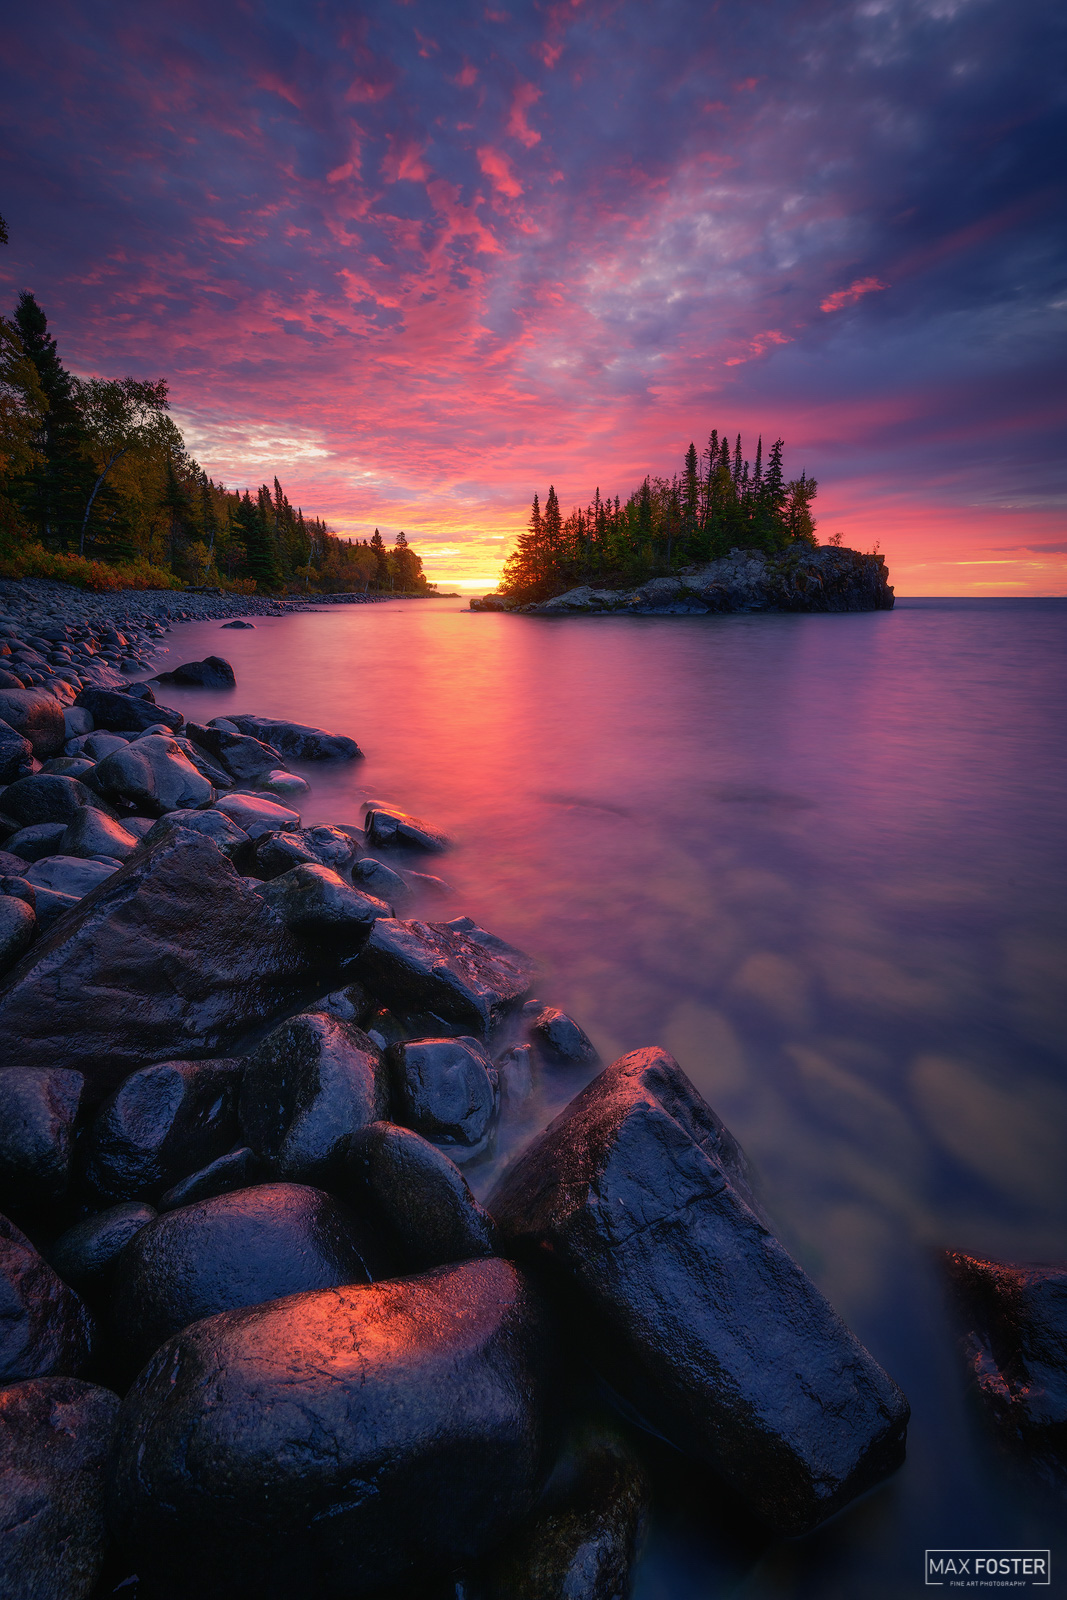 Bring nature into your home with Morning Glory, Max Foster's limited edition photography print of Lake Superior from his Minnesota...